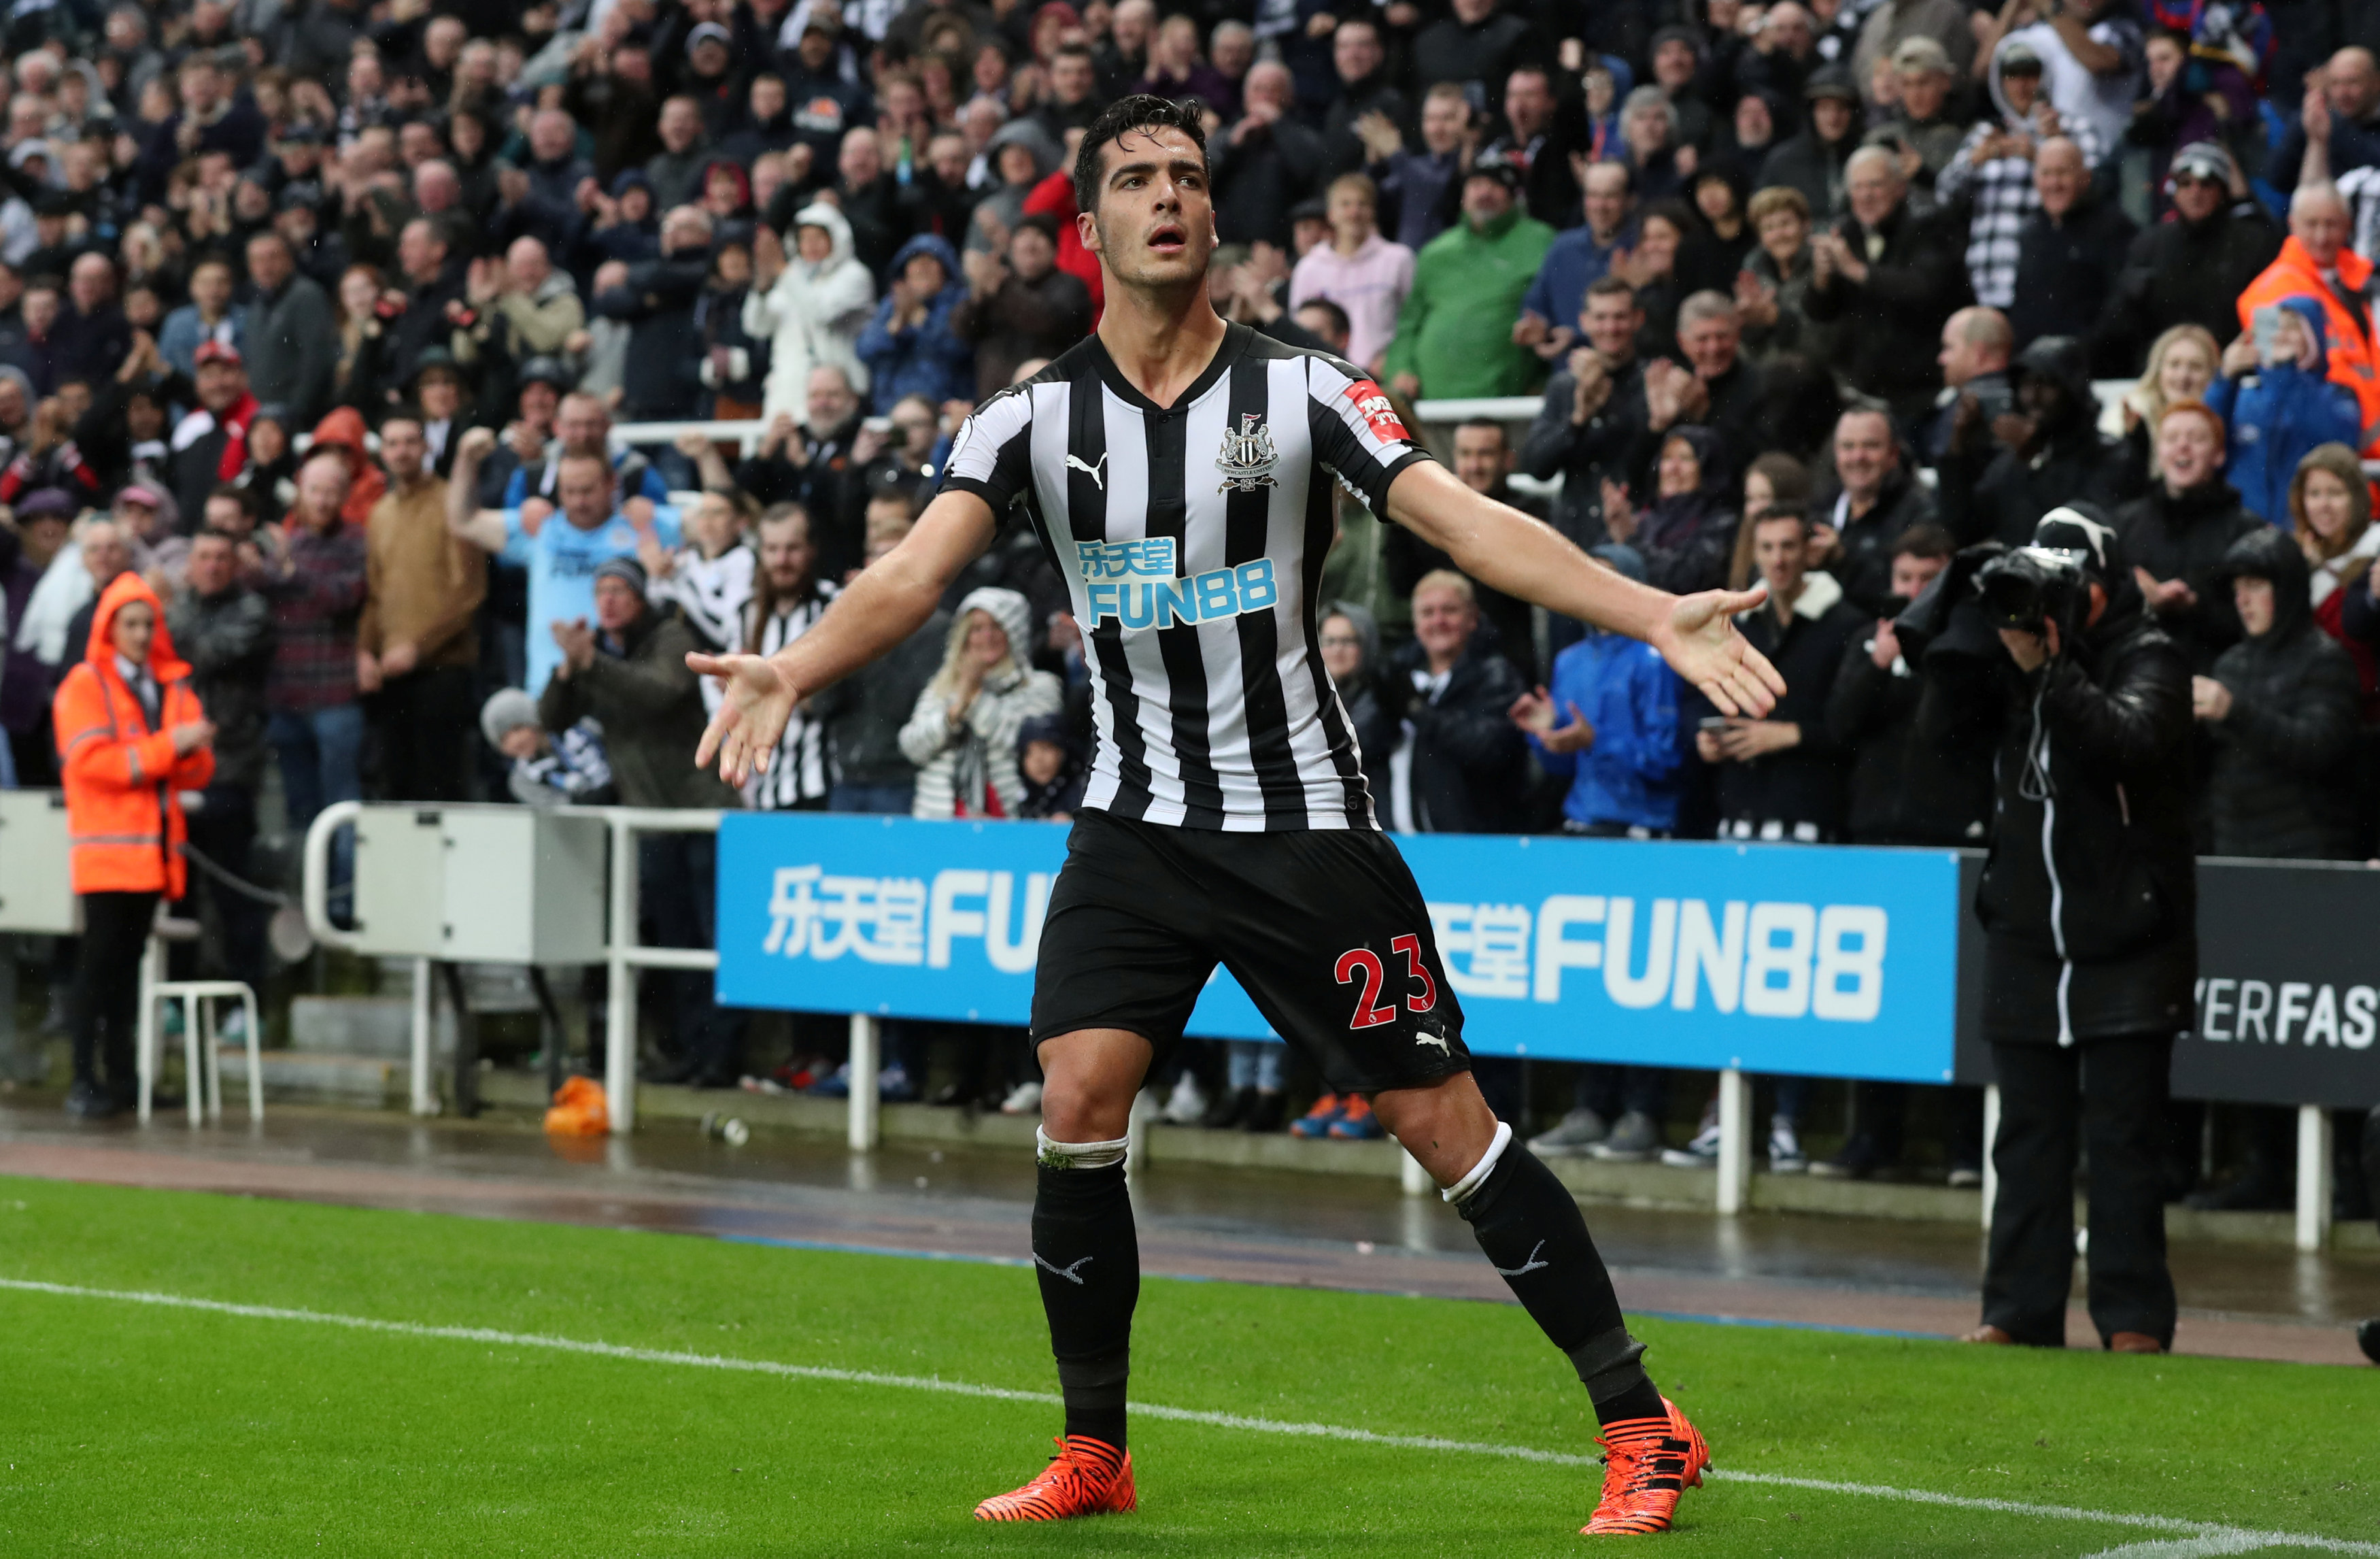 Football: Late Merino header gives Newcastle win over Palace